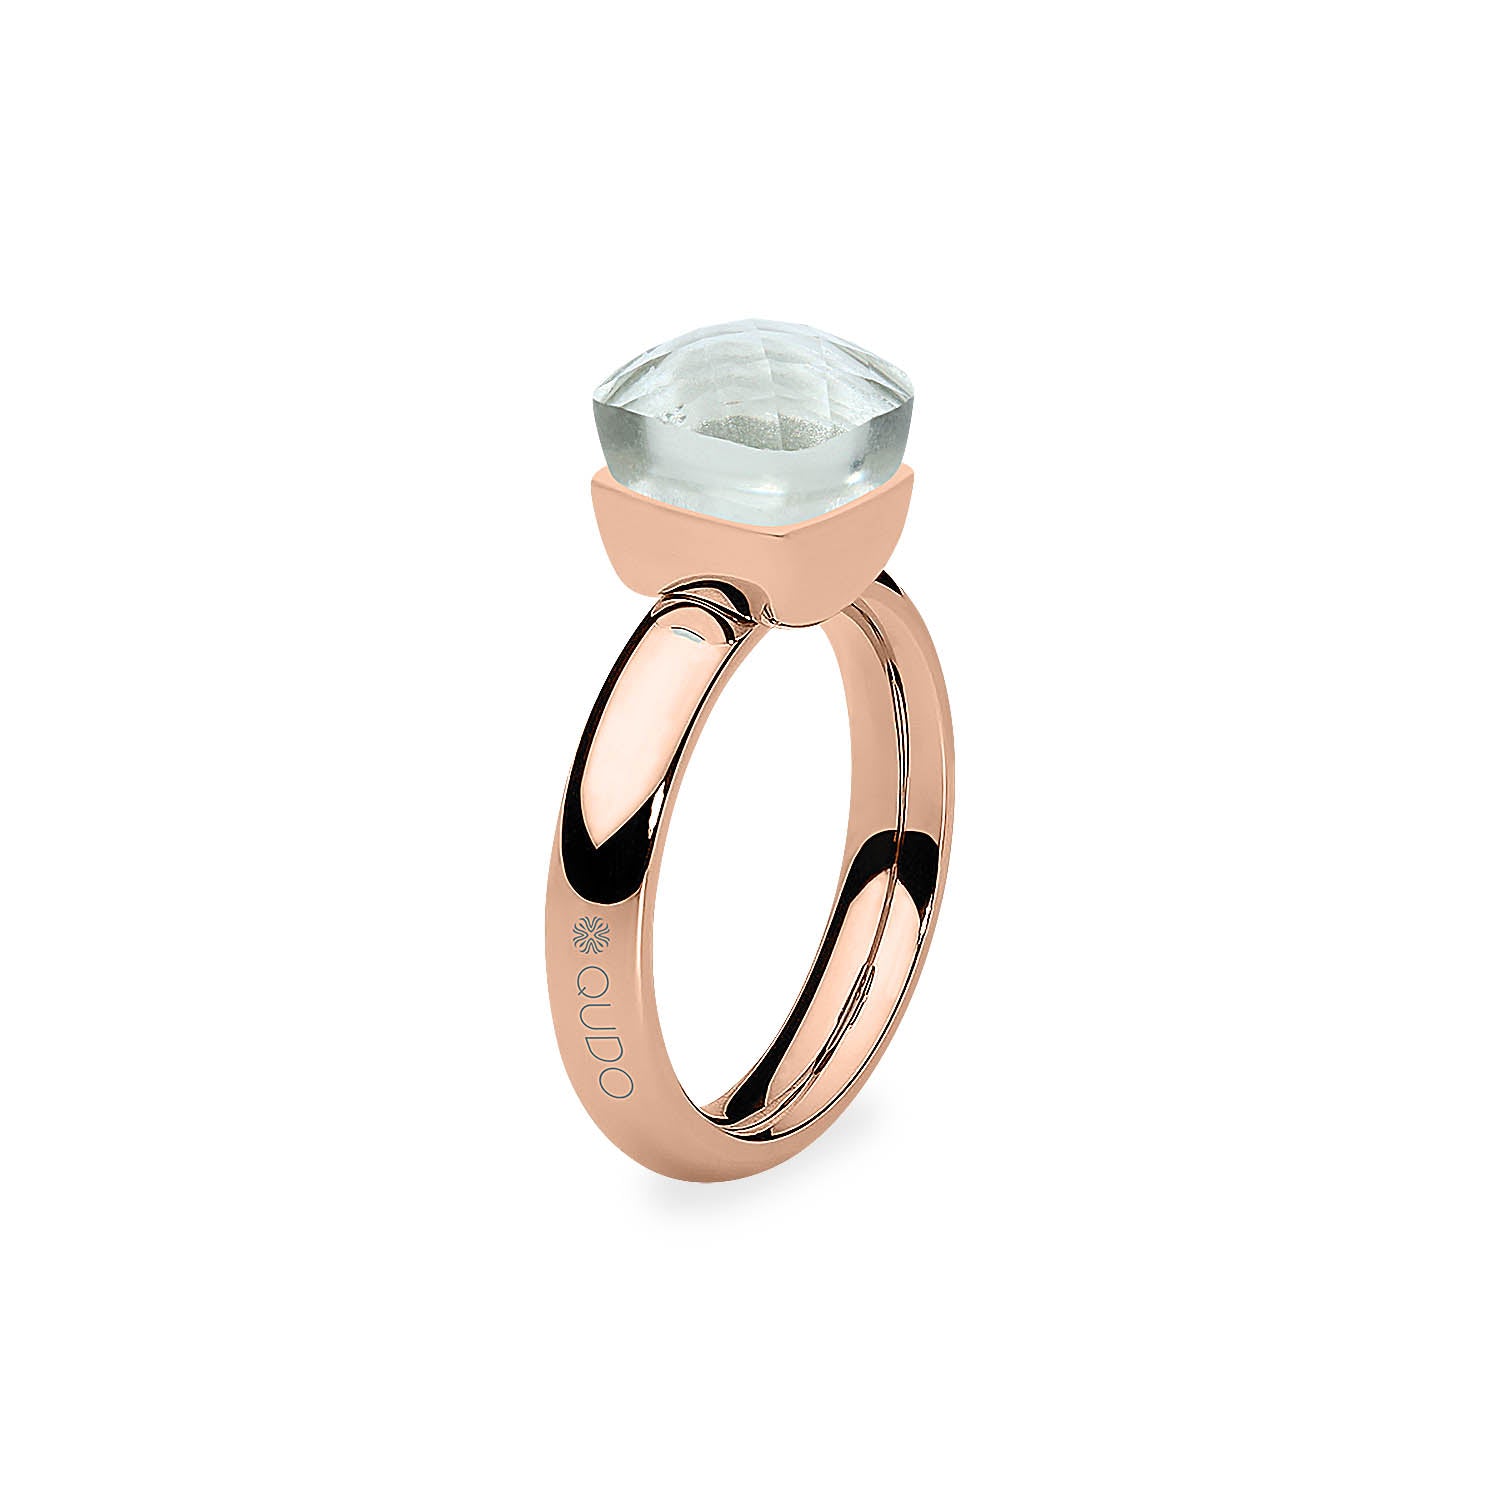 Firenze Ring - Shades of Rose & Grey - Roségold